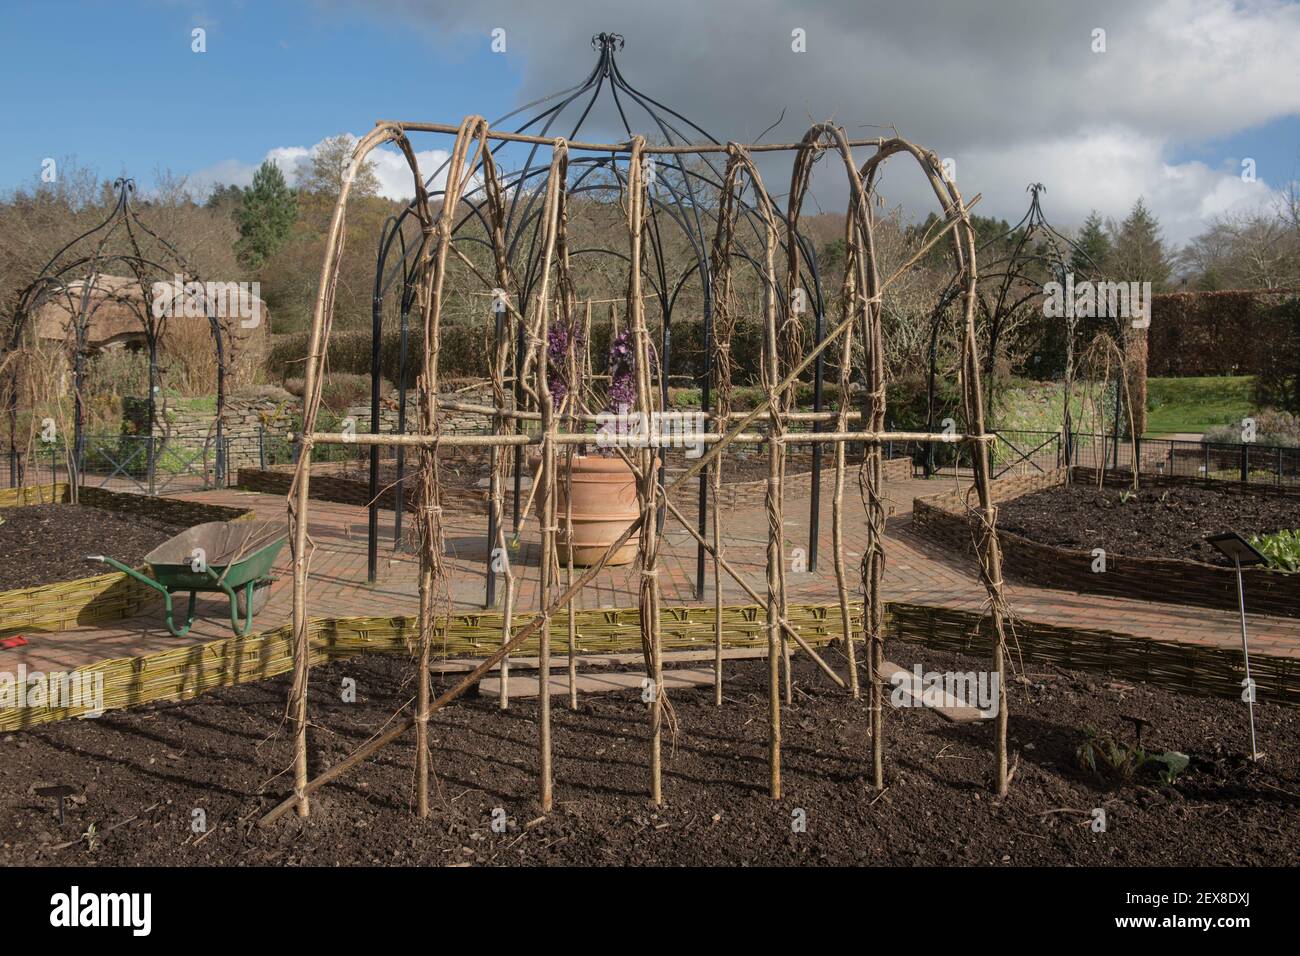 Arch or Wigwam Being Built from Hazel Sticks to Support Climbing Plants and Vegetables in a Potager Garden in Rural Devon, England, UK Stock Photo